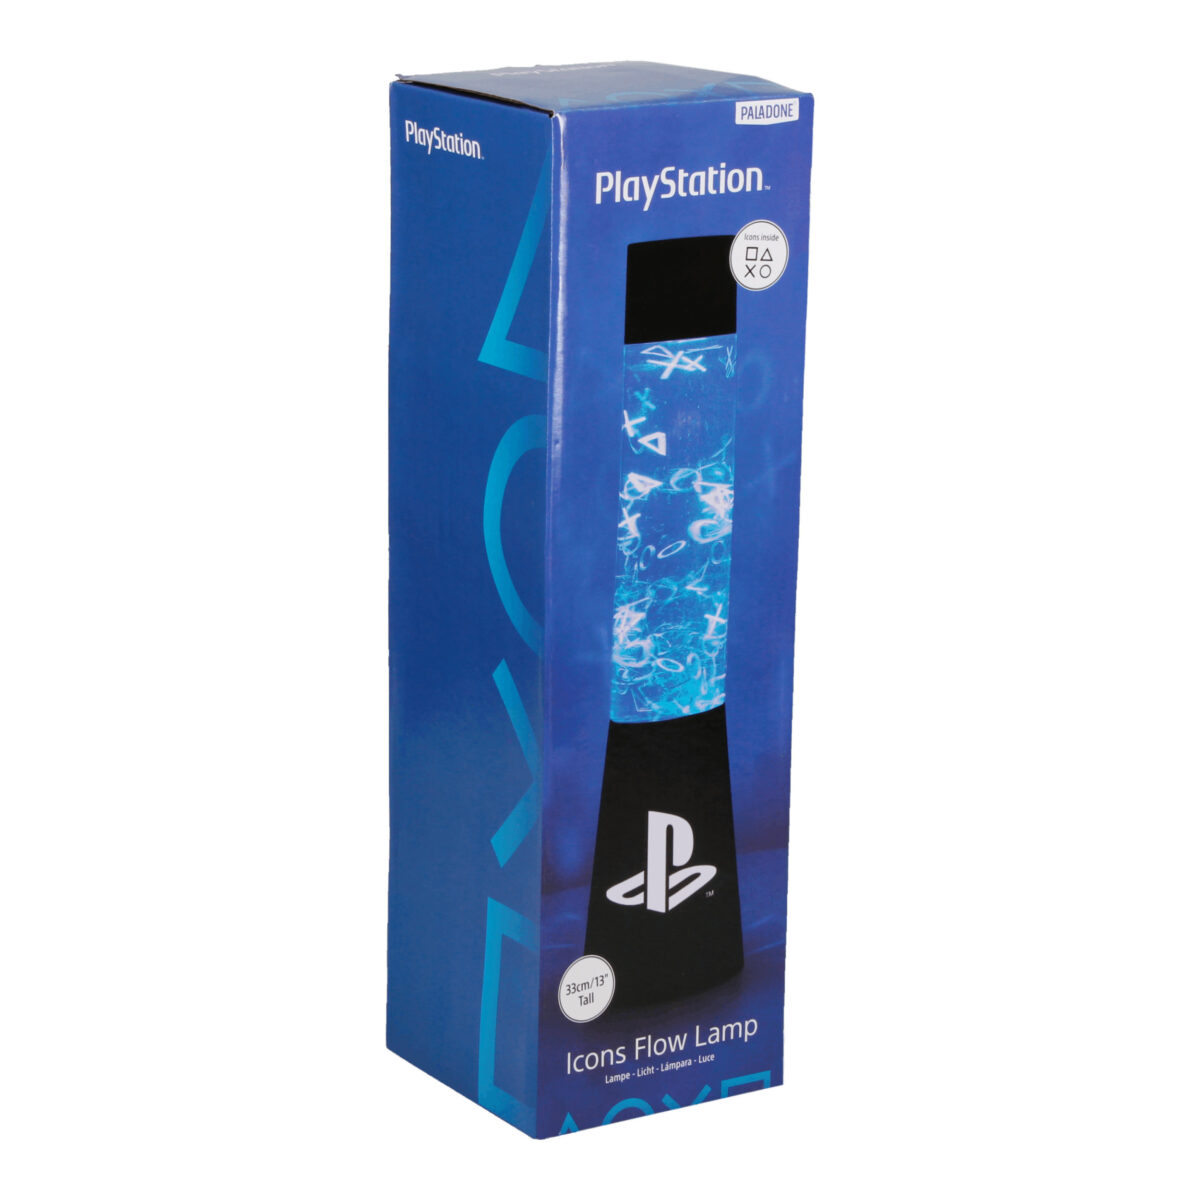 PP10211PS PlayStation Plastic Flow Lamp packaging 1